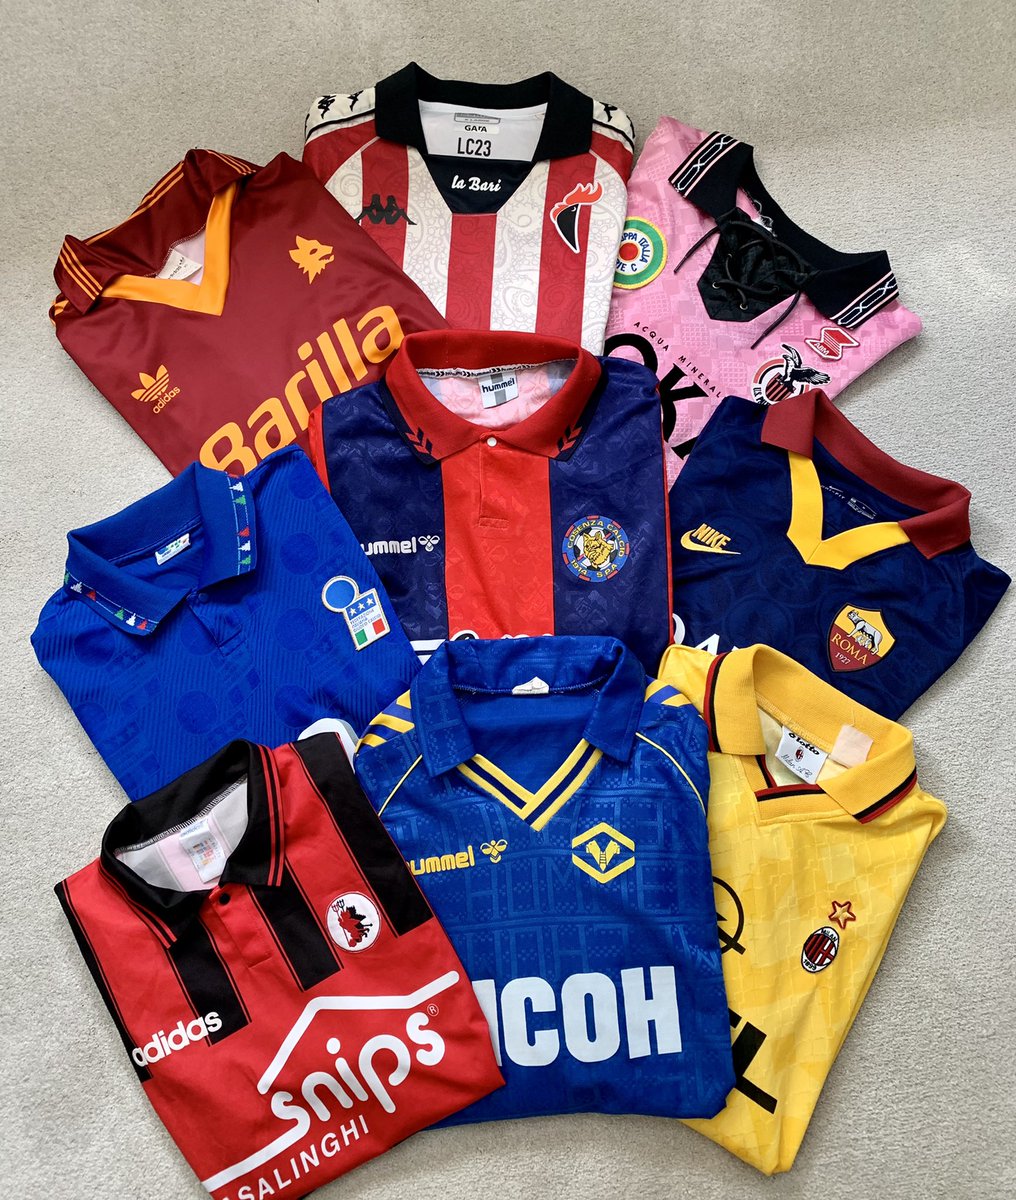 It’s Football Shirt Friday! Which one are you choosing? #FootballShirtFriday